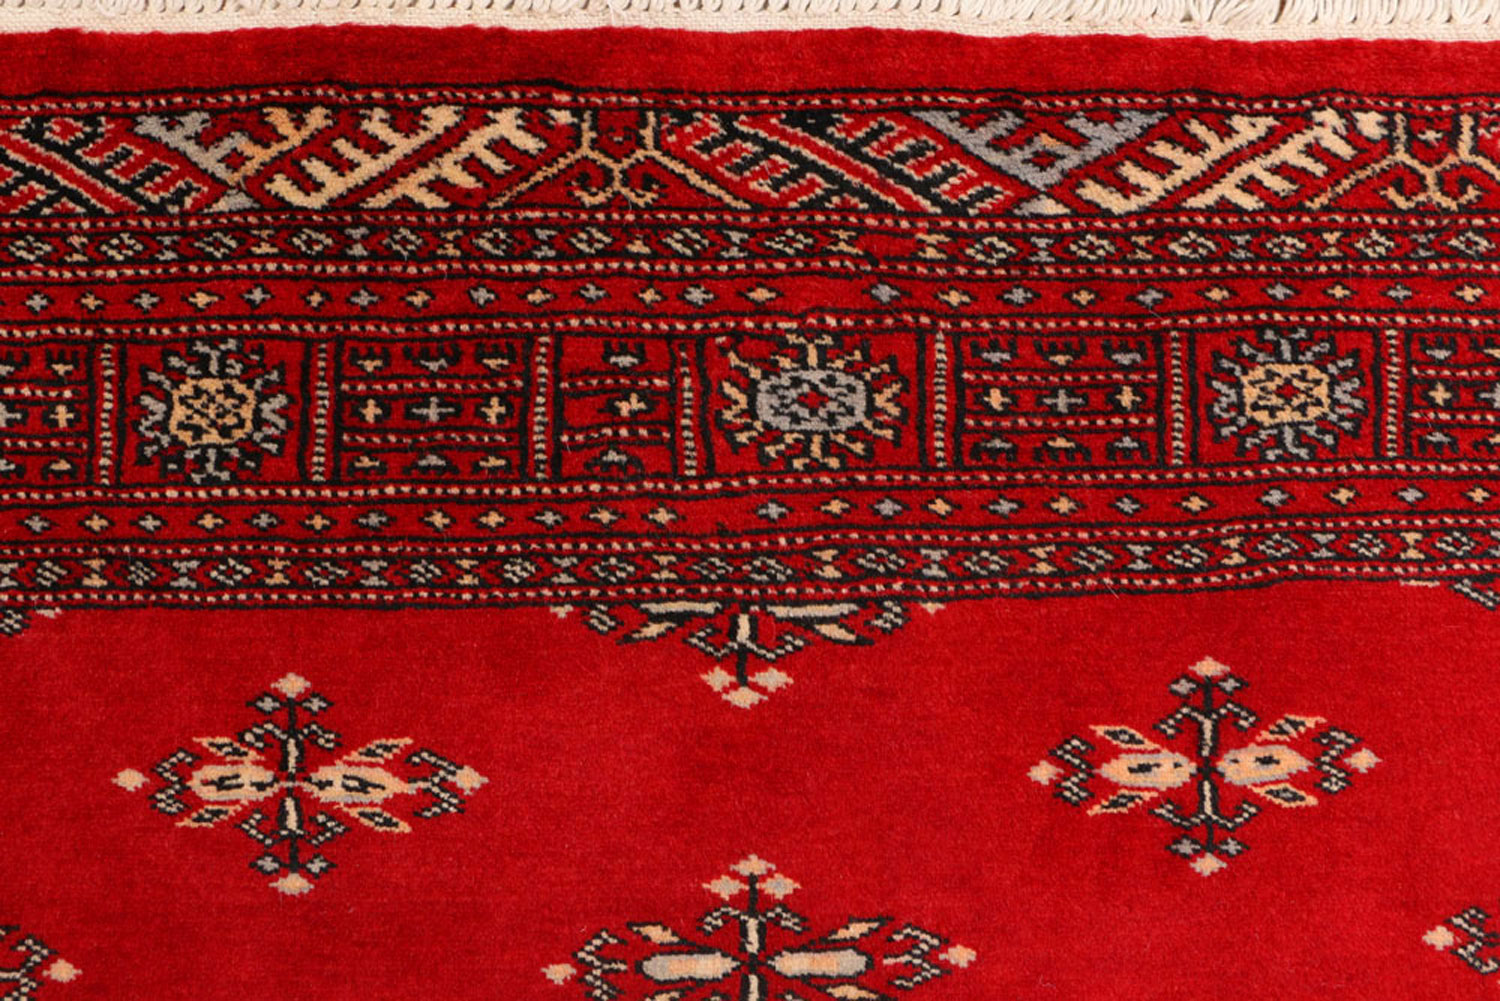 King Bed Area Rug Size